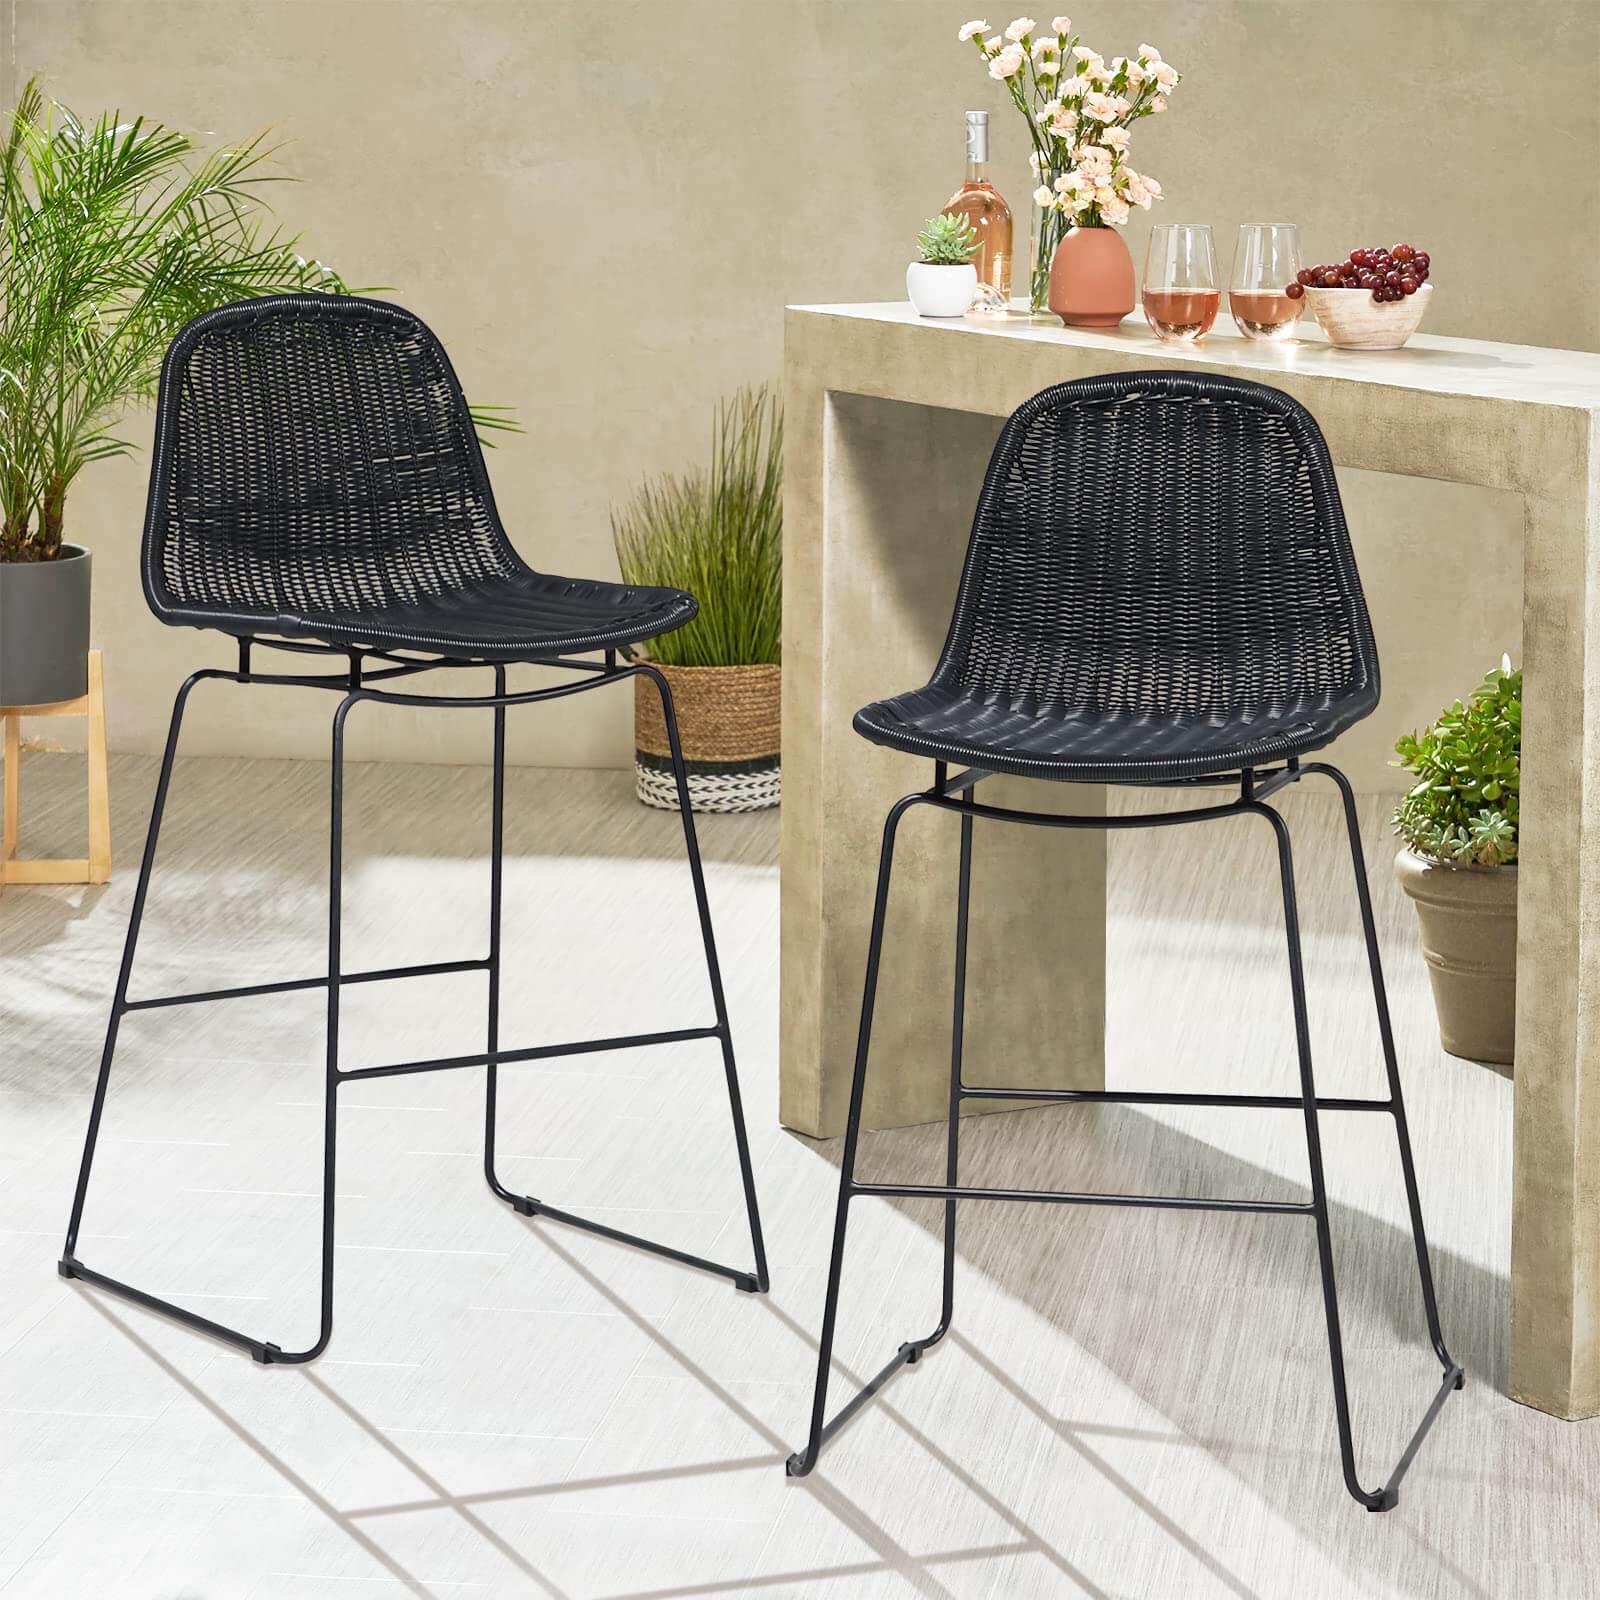 Patio Bar Stools, Outdoor Wicker Bar Stools with Back Footrest, All-Weather Metal Frame